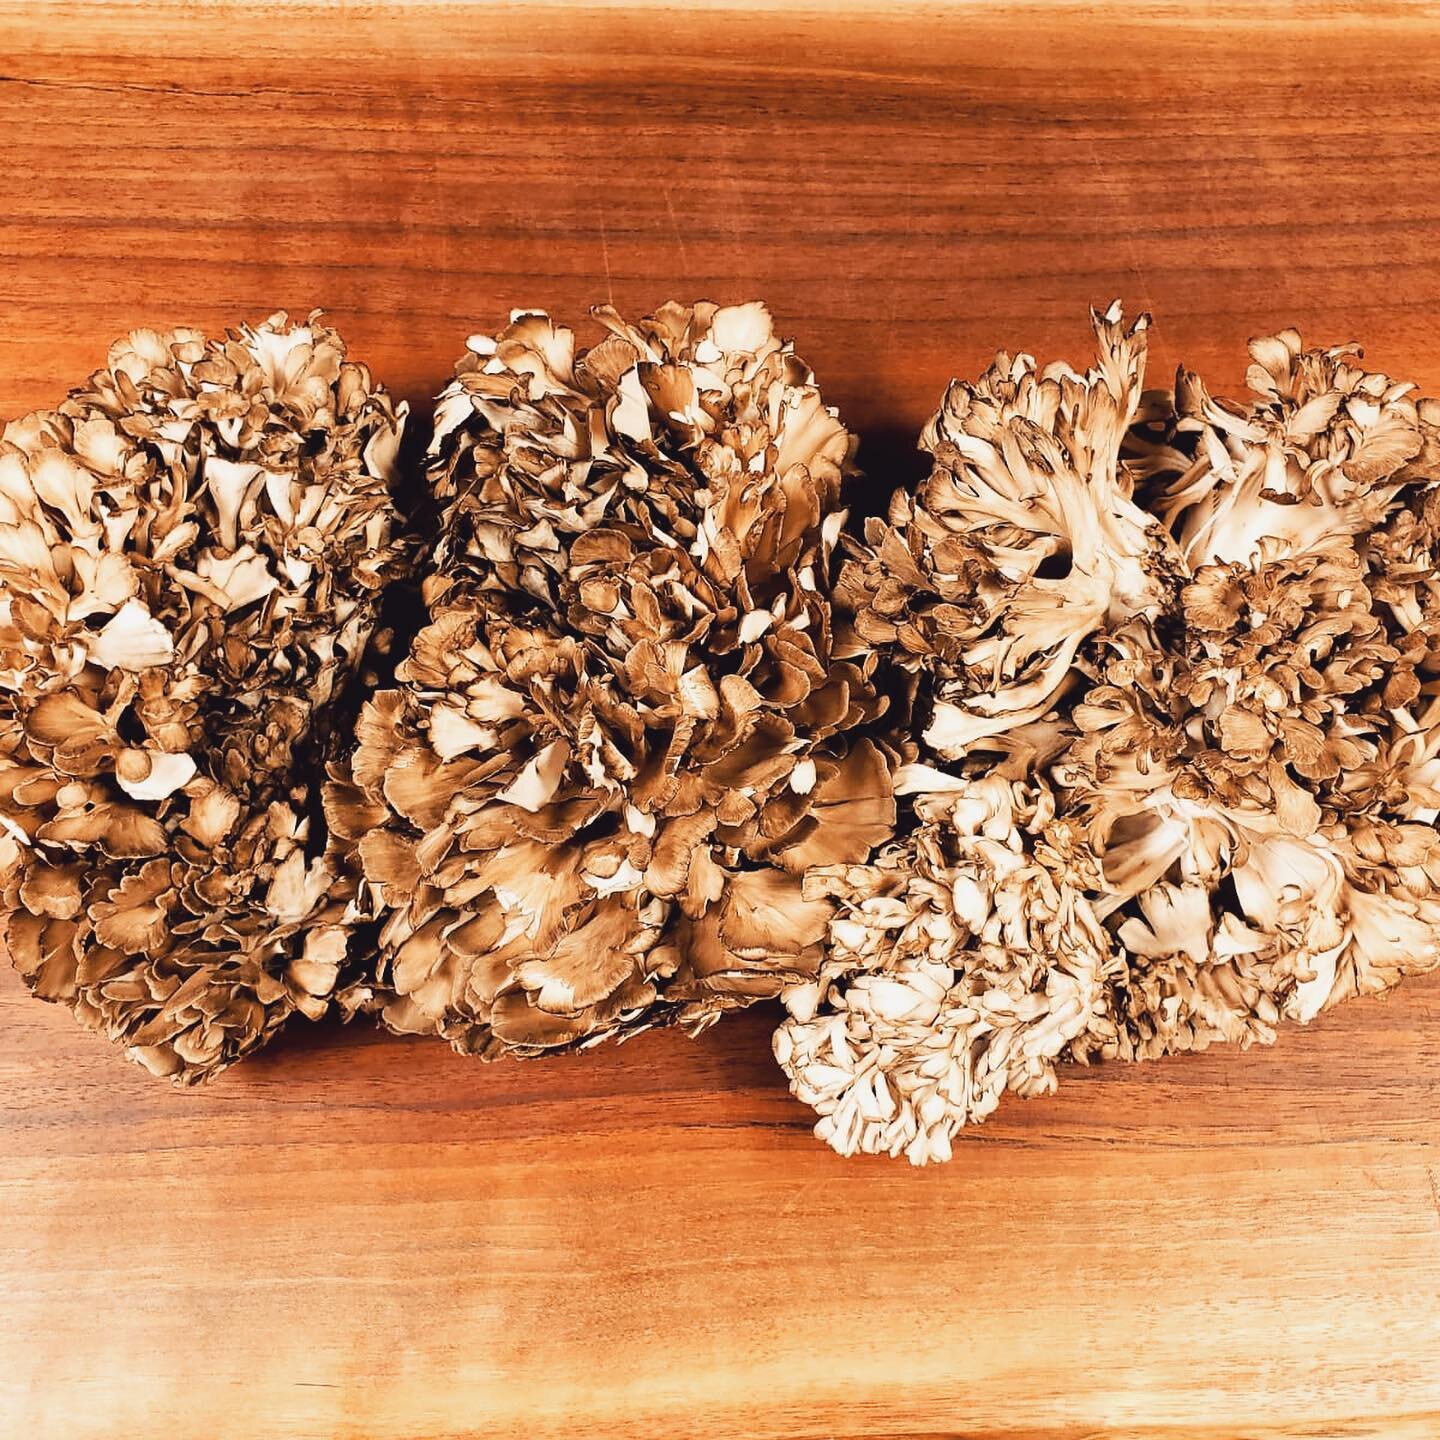 Check out these beautiful Kennett Square maitake mushrooms! Be sure to stop in this week for our market omelette that will be featuring them!